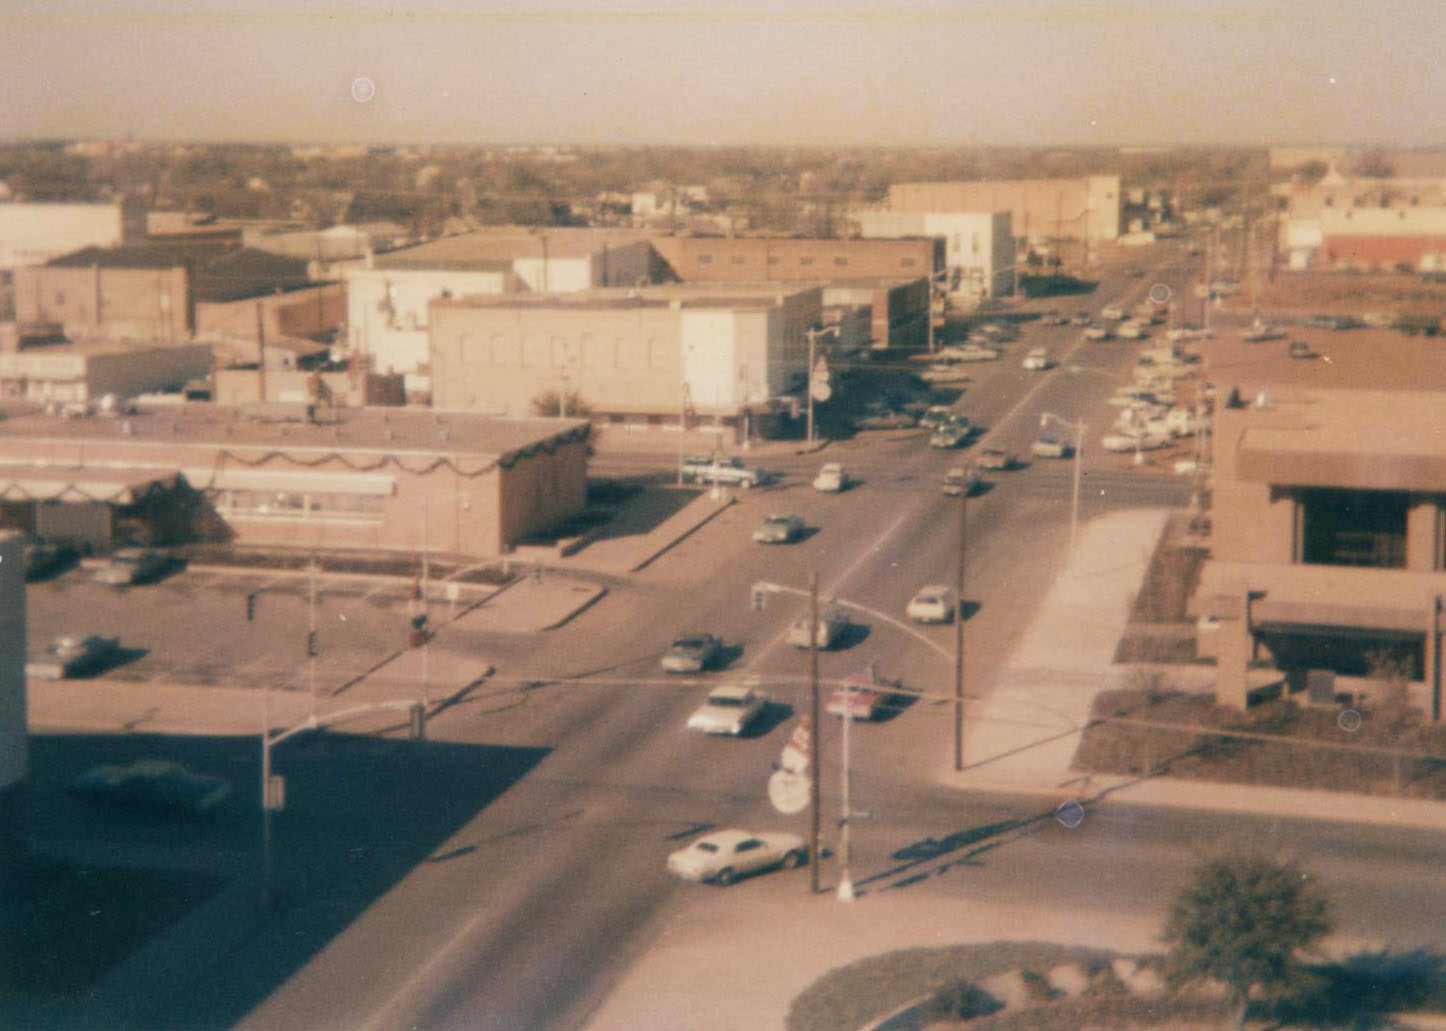 Downtown Arlington with buildings, cars, streets, and power lines, 1973